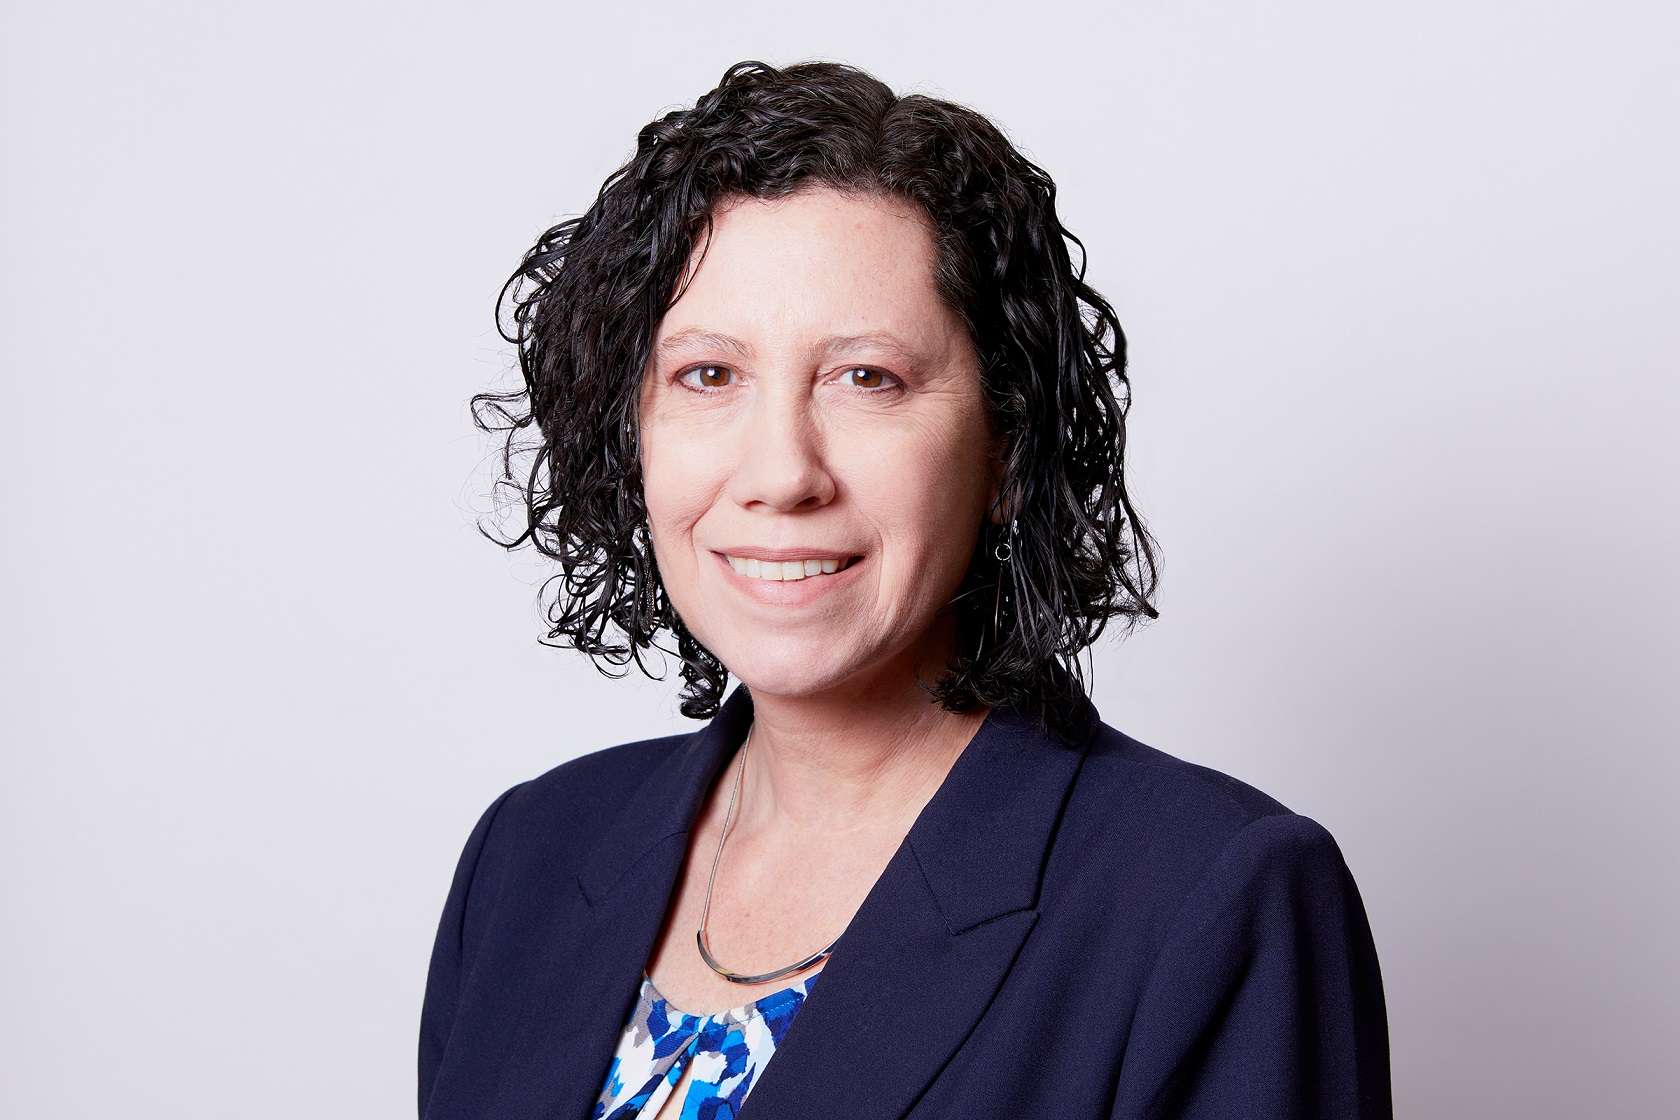 A woman with curly hair wearing a blue blazer